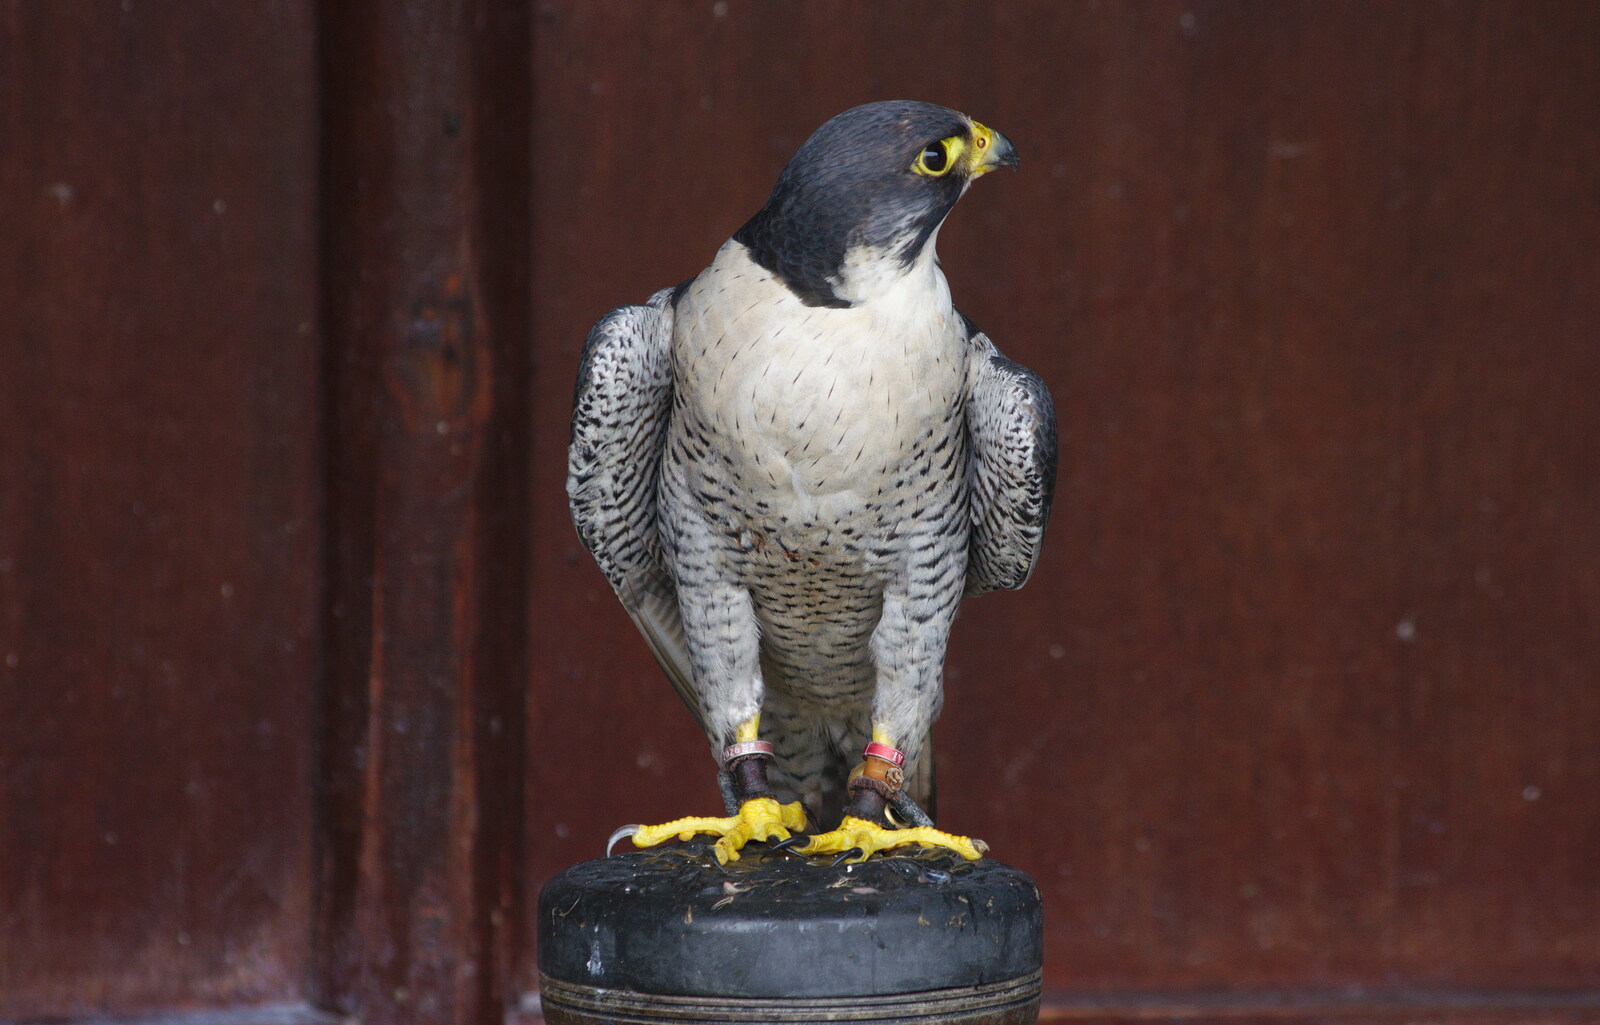 A wide-eyed Peregrine Falcon from A Birthday Trip to the Zoo, Banham, Norfolk - 26th May 2014